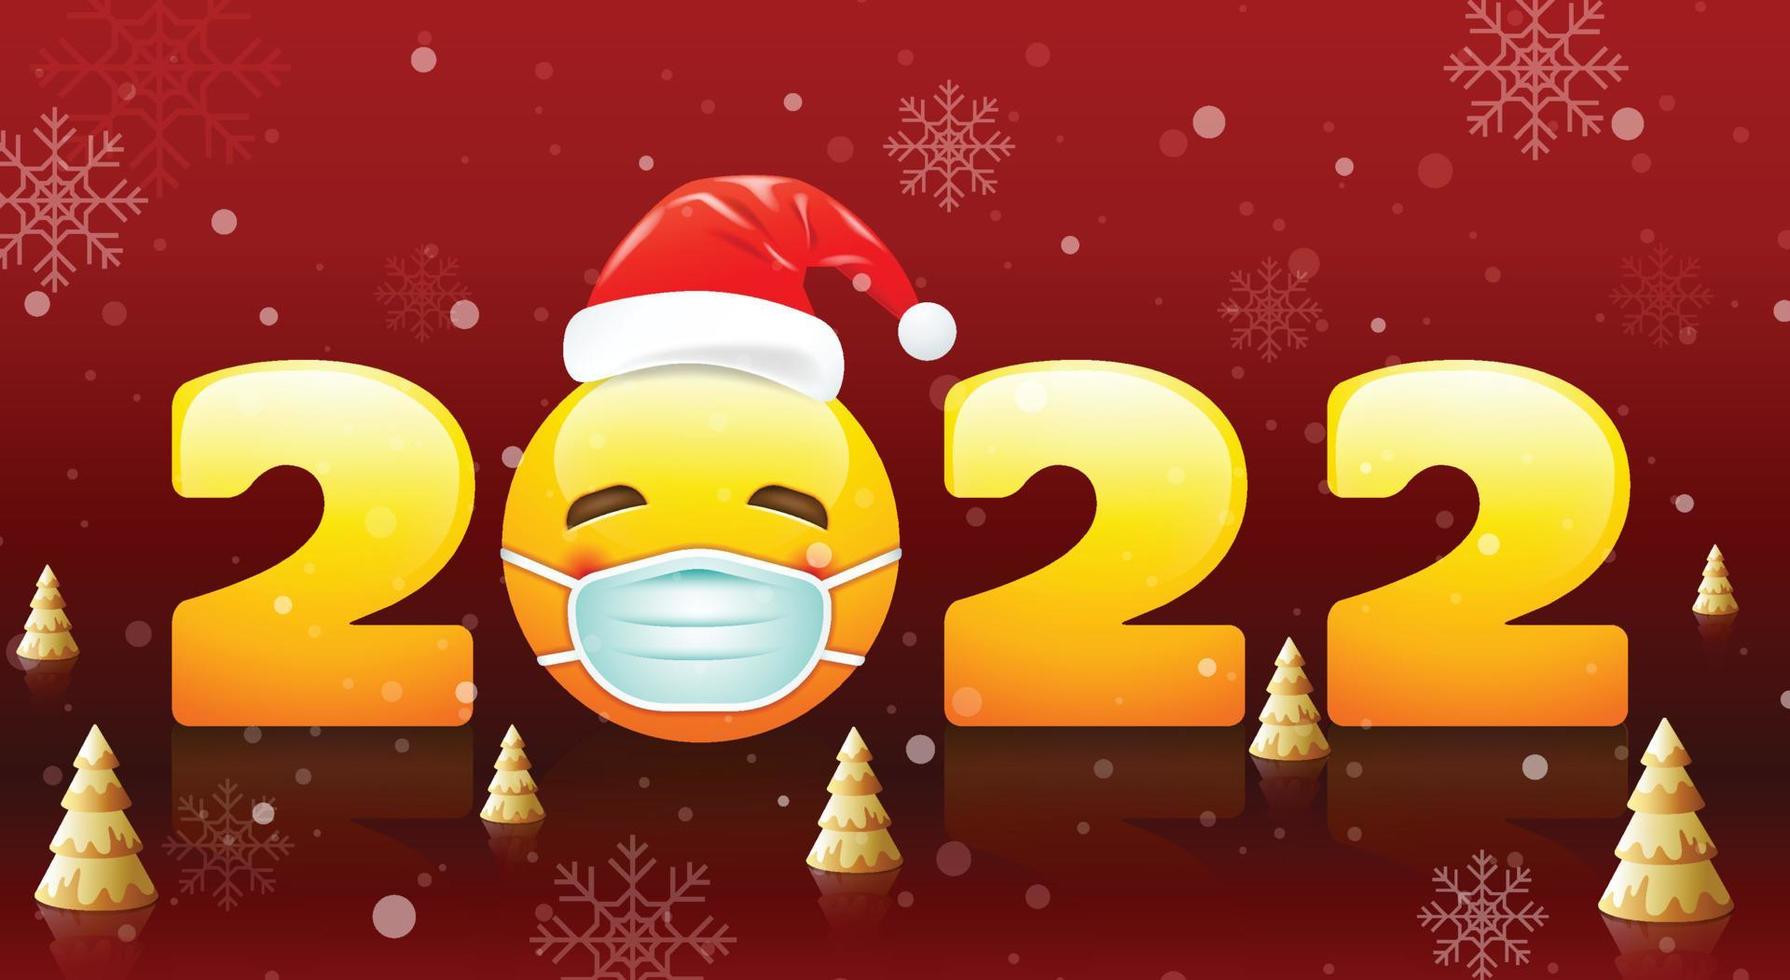 Merry Christmas and Happy new year 2022, New normal vector